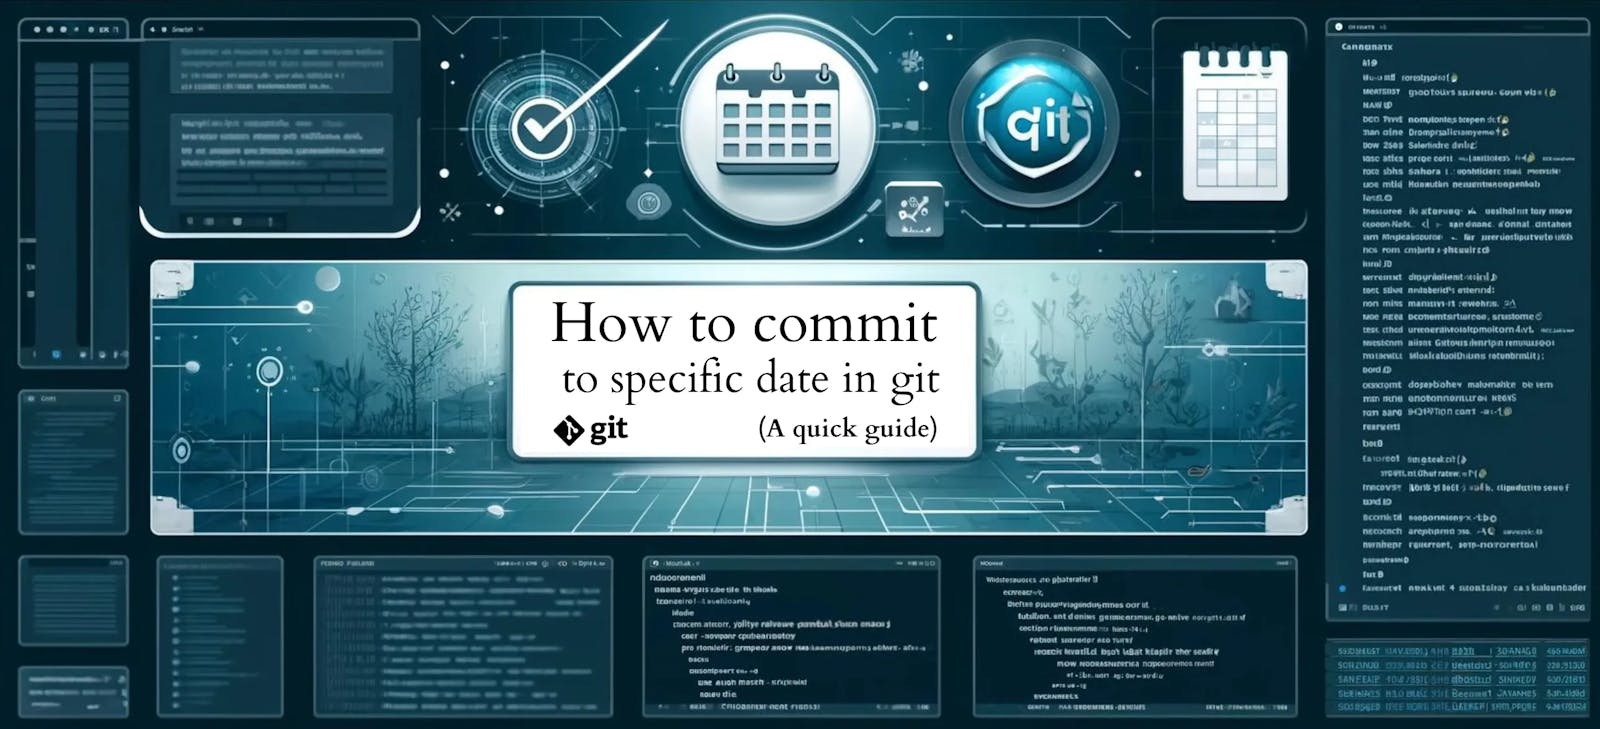 How to Commit to a Specific Date in Git: A Quick Guide